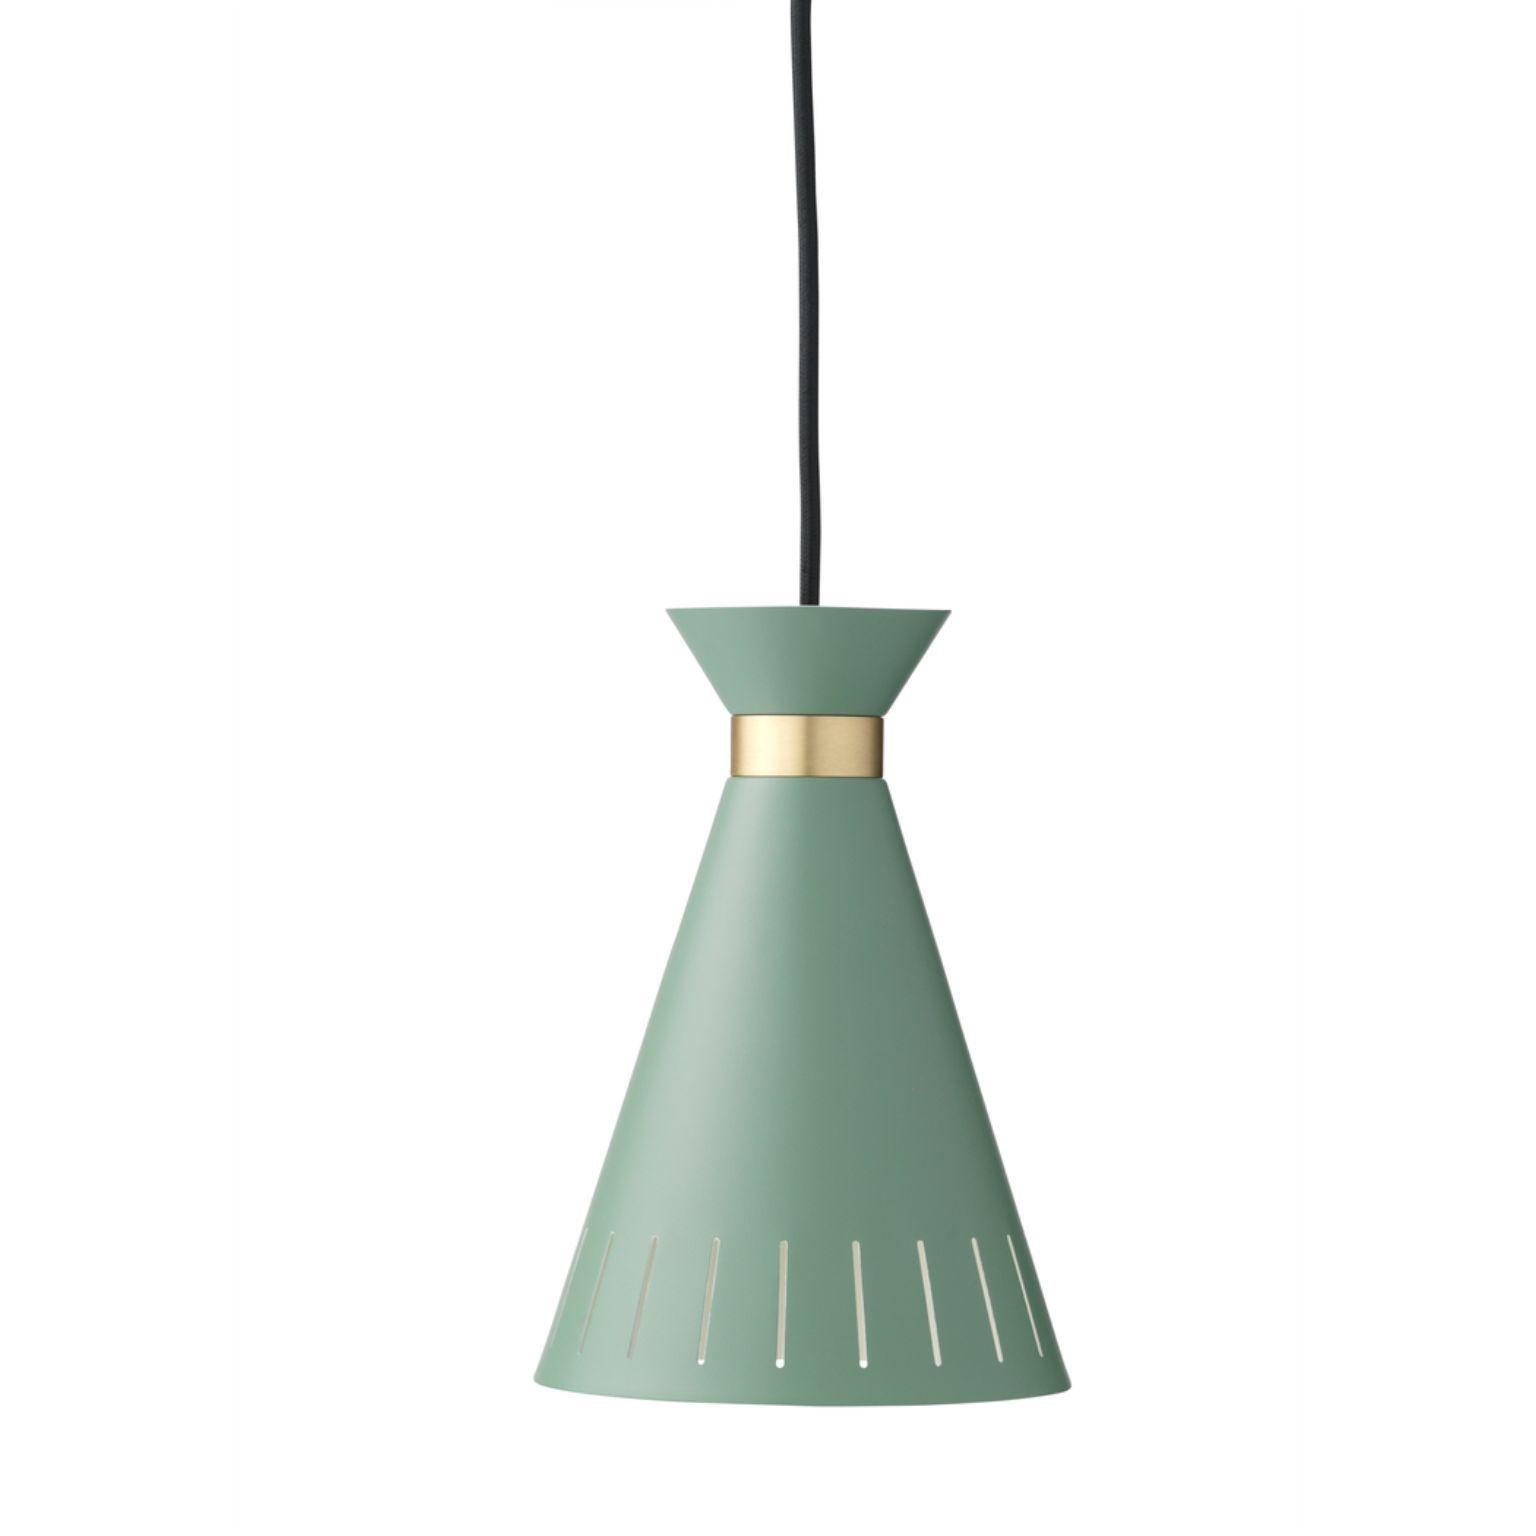 Cone Dusty green pendant by Warm Nordic
Dimensions: D 16x W 16 x H23 cm
Material: Lacquered steel, Solid brass
Weight: 1 kg
Also available in different colours.

A classic pendant with charm, finesse and an elegant, solid brass ring, designed